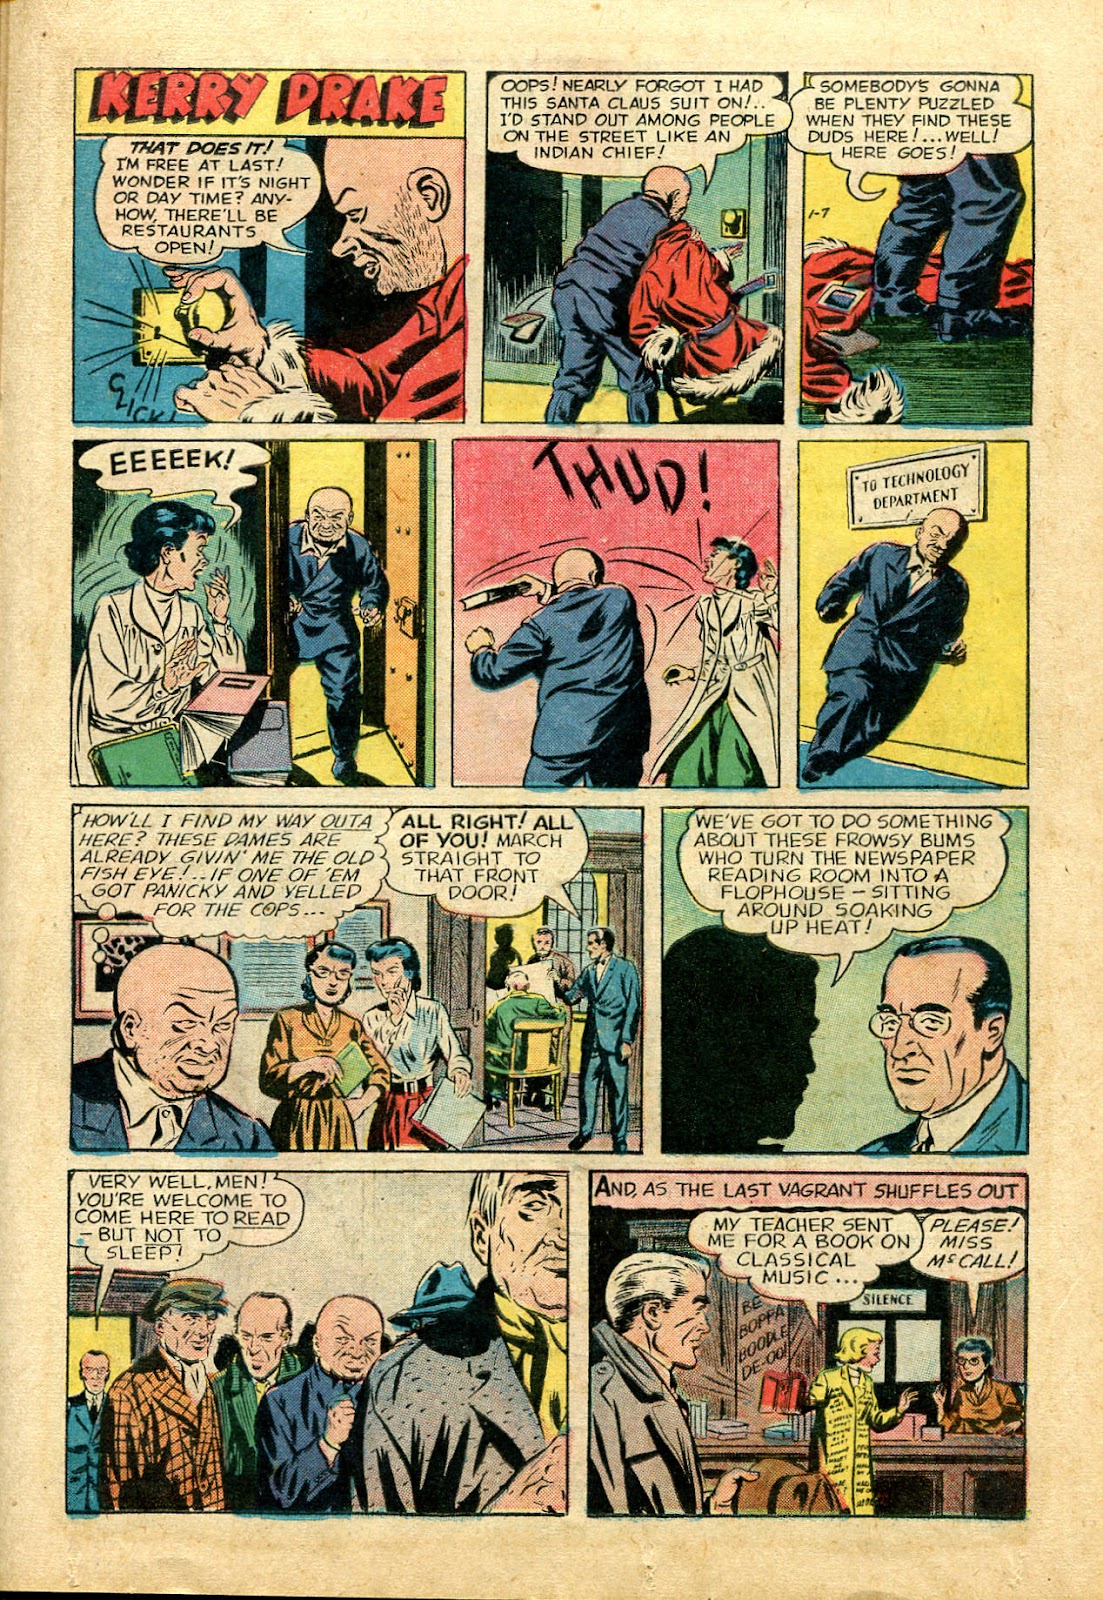 Kerry Drake Detective Cases issue 29 - Page 21